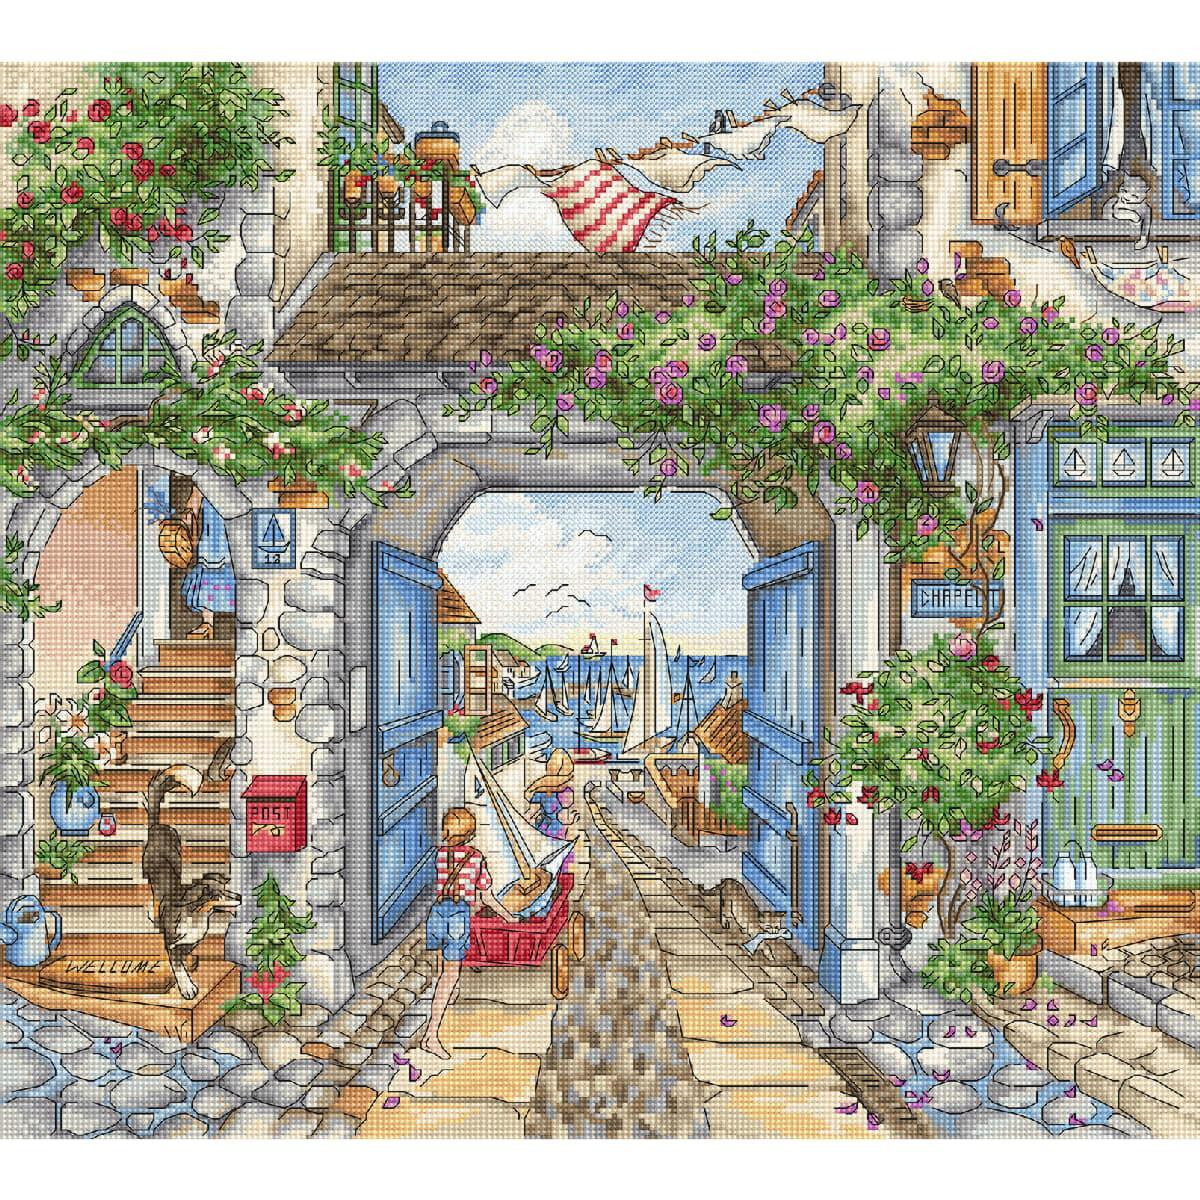 Letistitch counted cross stitch kit "To the...